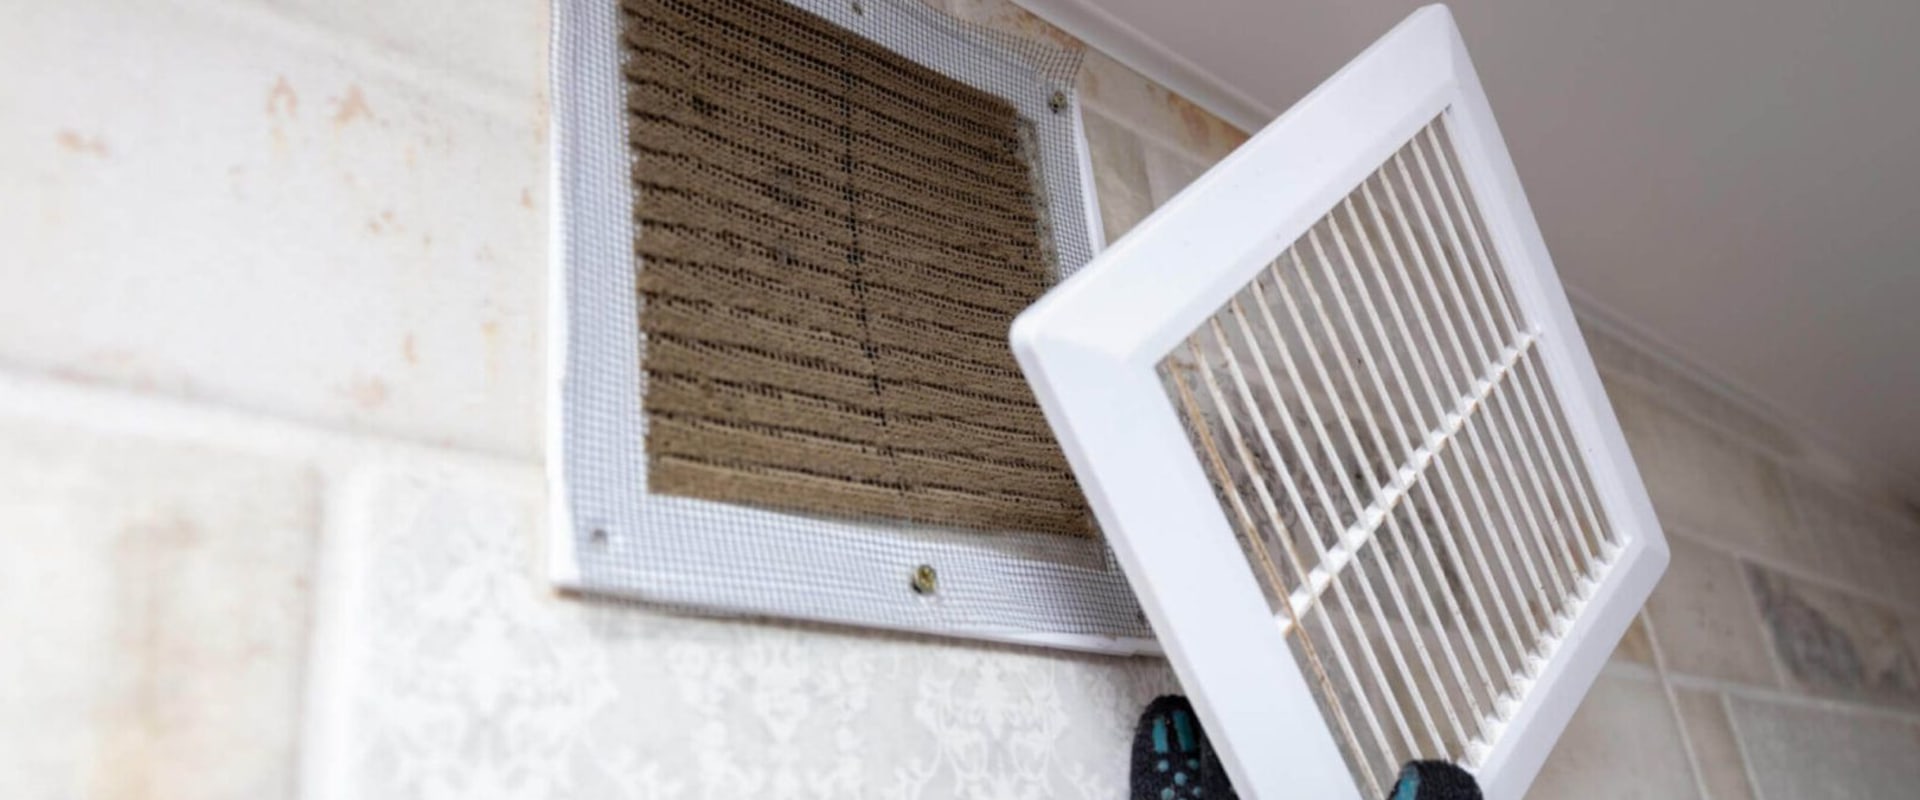 Can a Dirty Filter Stop Your AC From Blowing Cold Air?